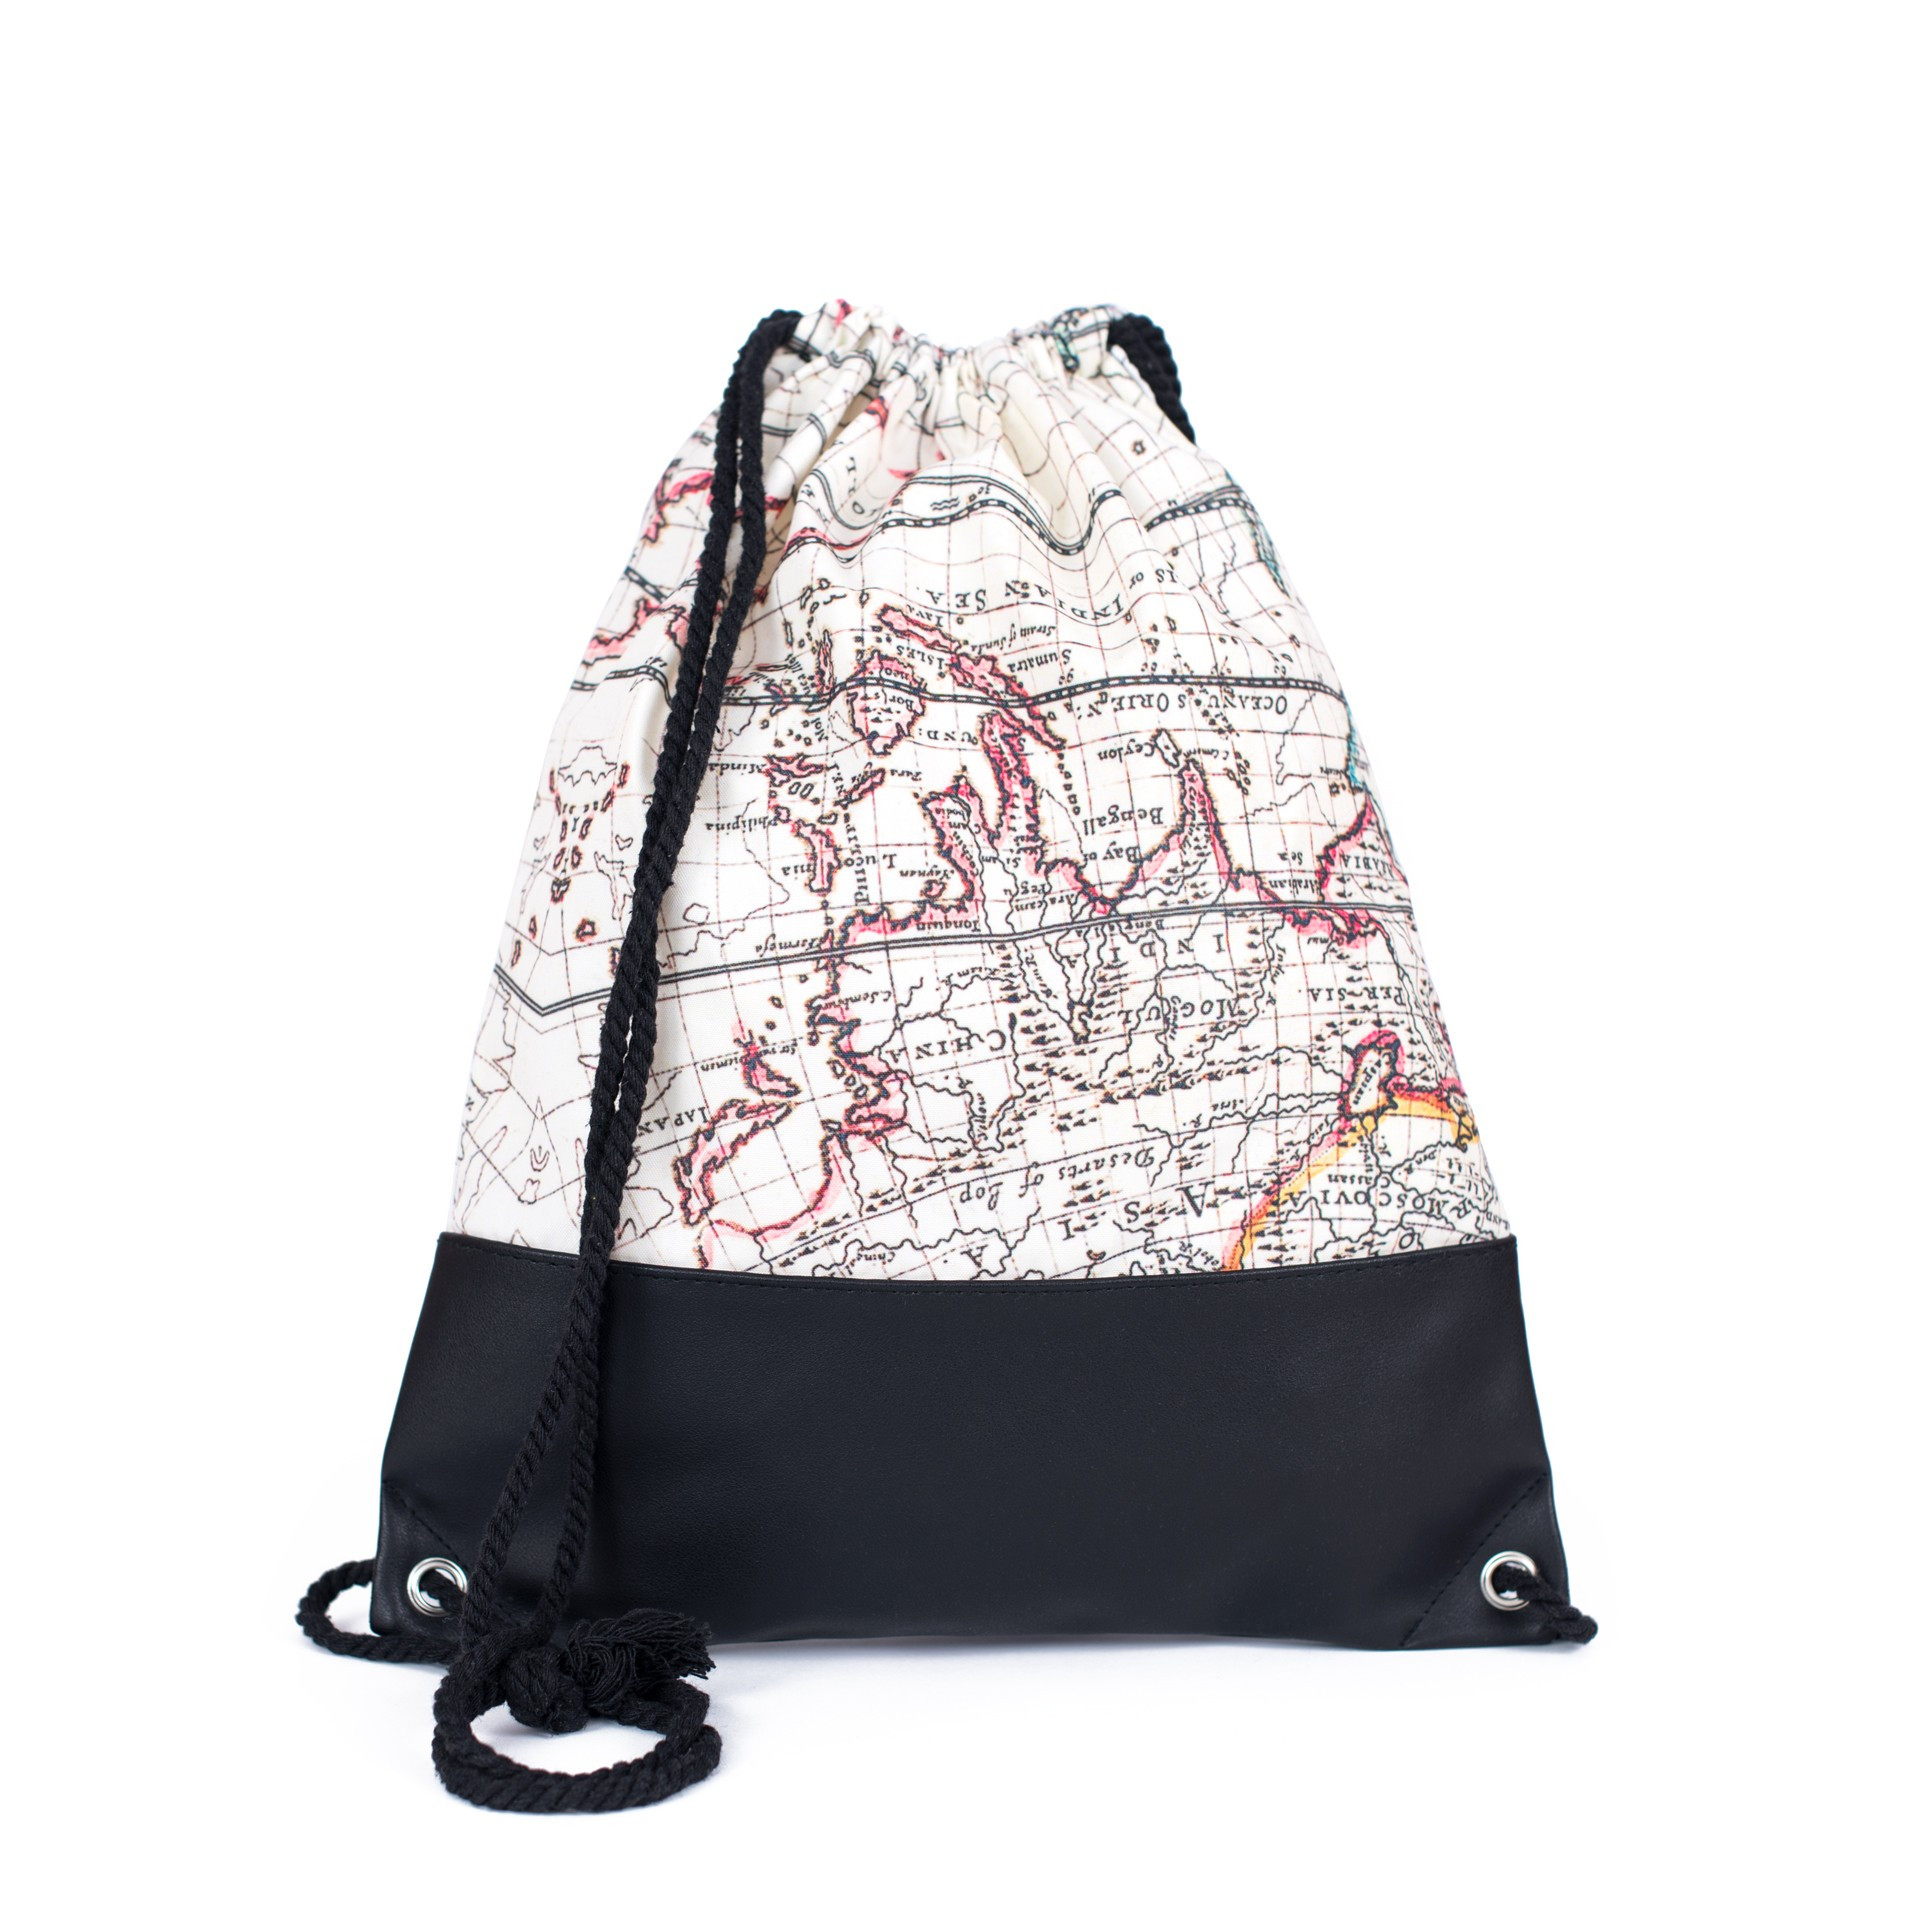 Art Of Polo Backpack Tr18233 Black/White Vhodné pro formát A4